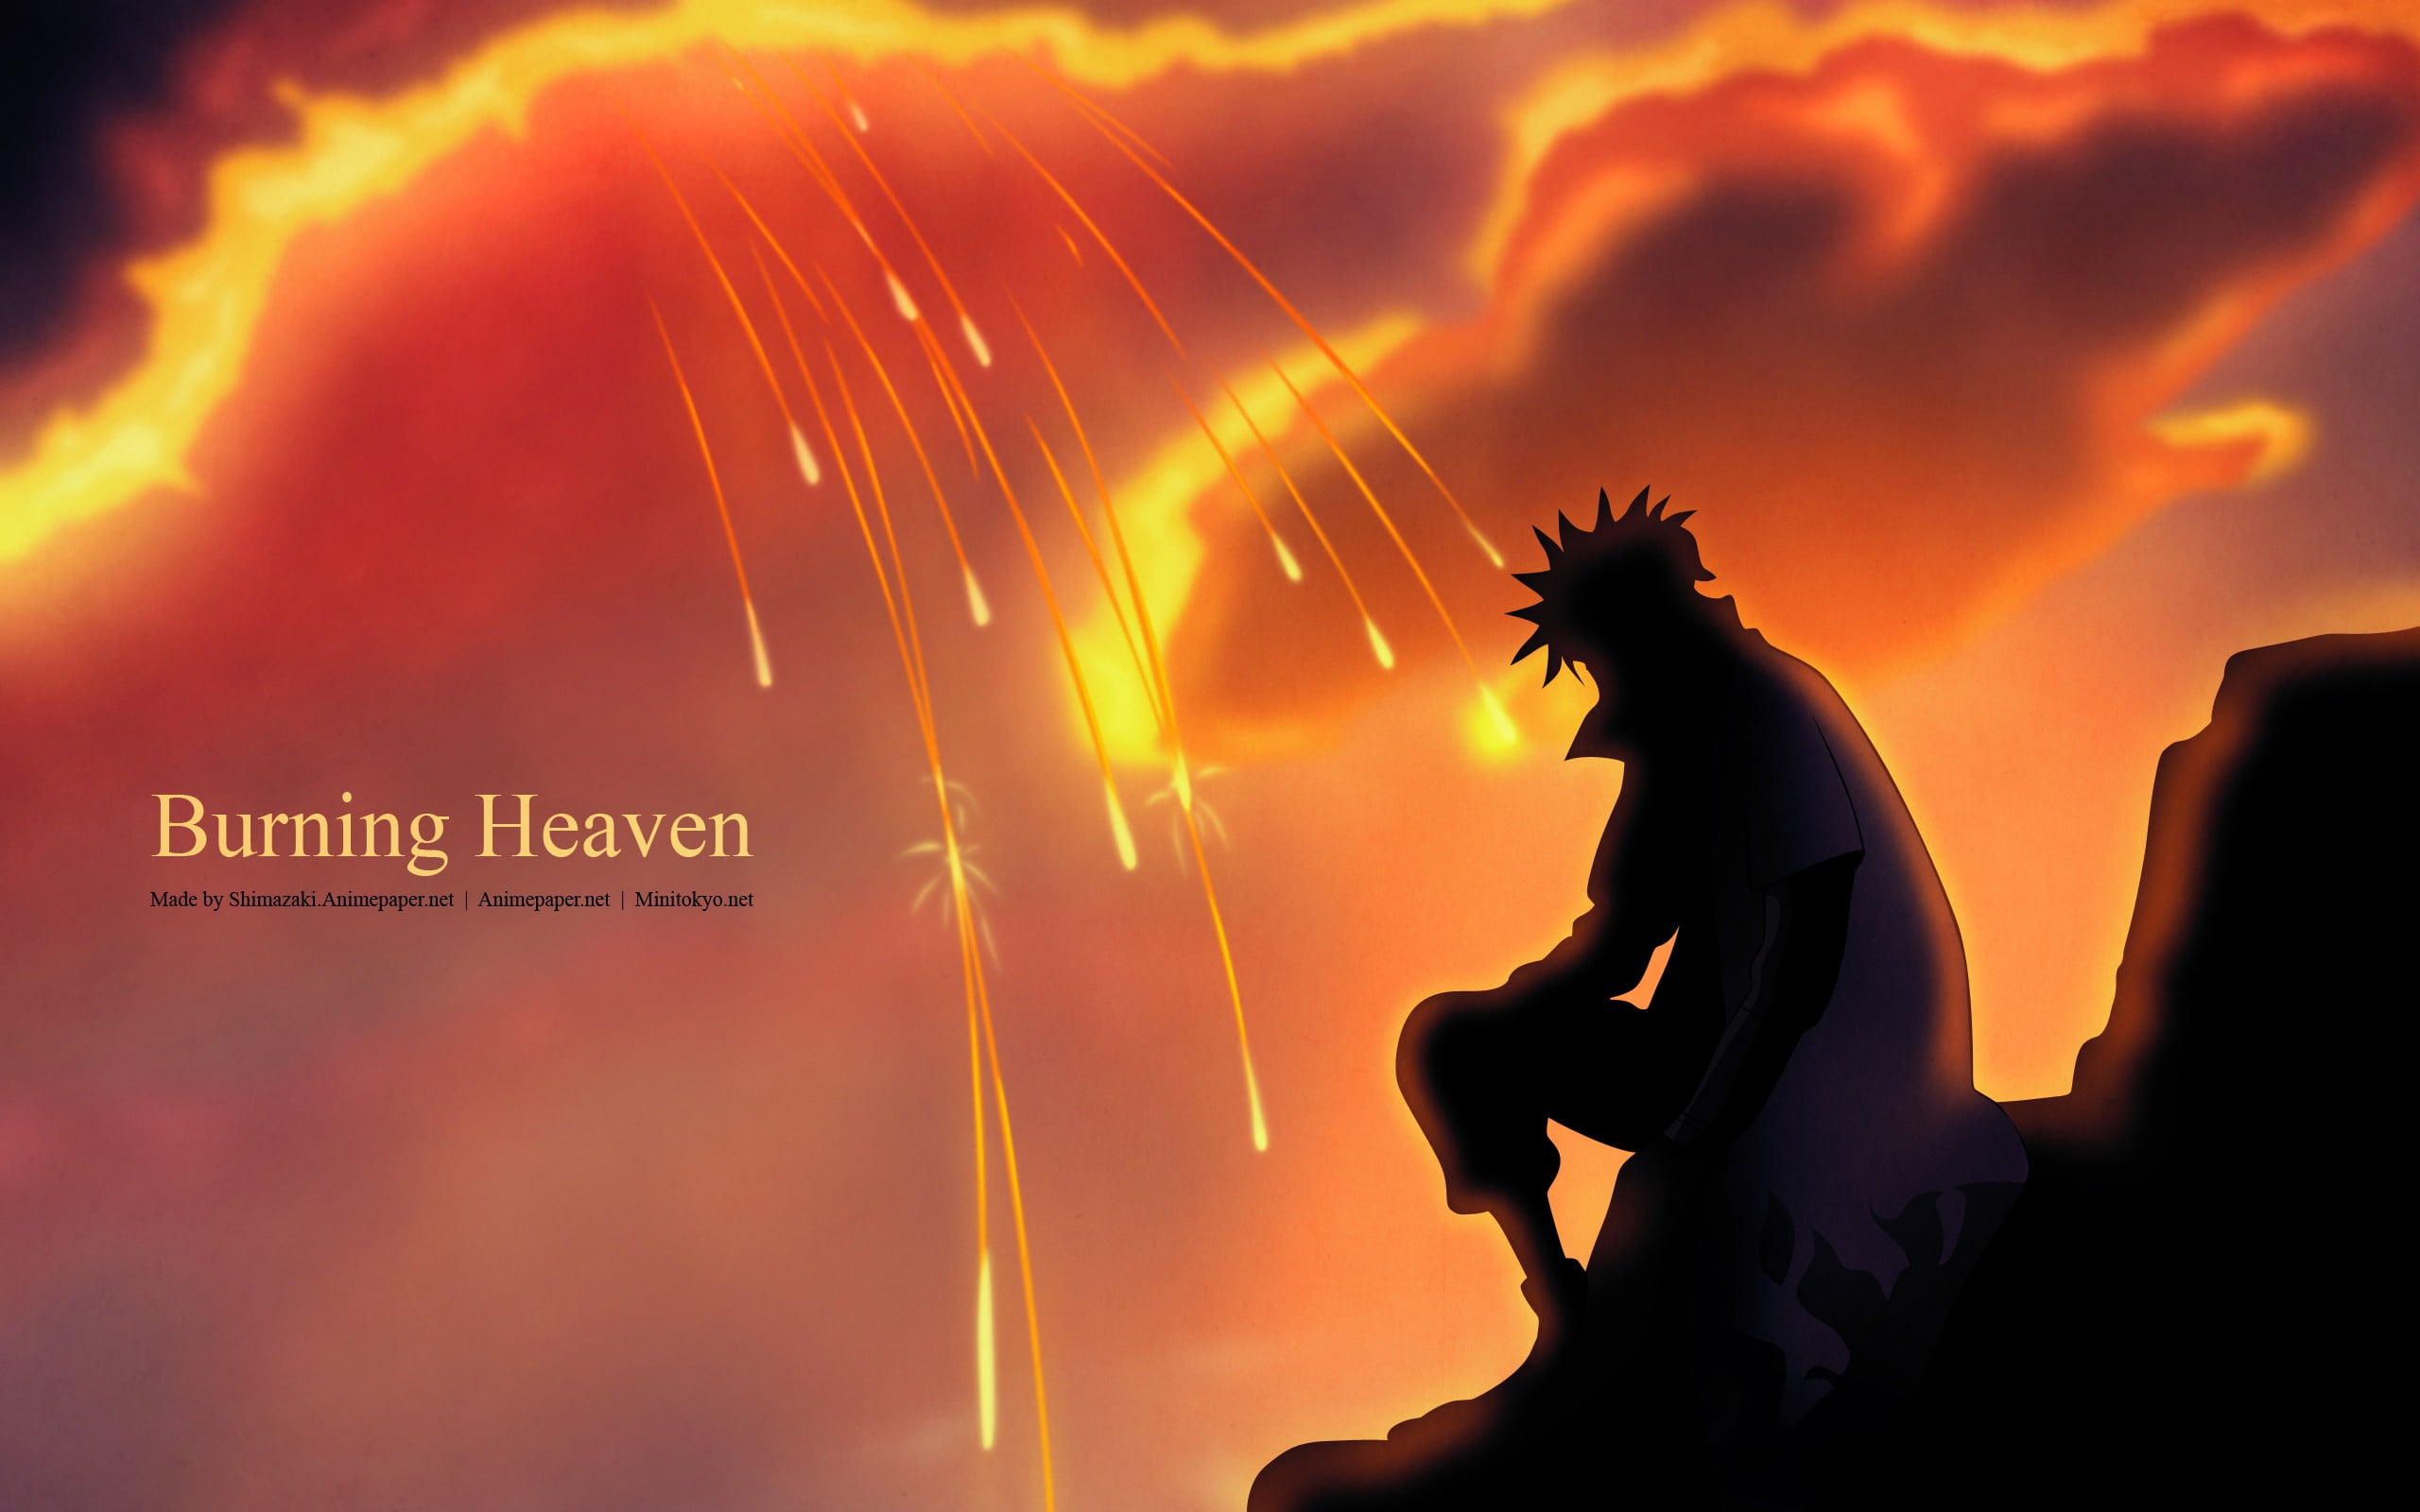 Naruto Wallpapers With Quotes - 2560x1600 Wallpaper 